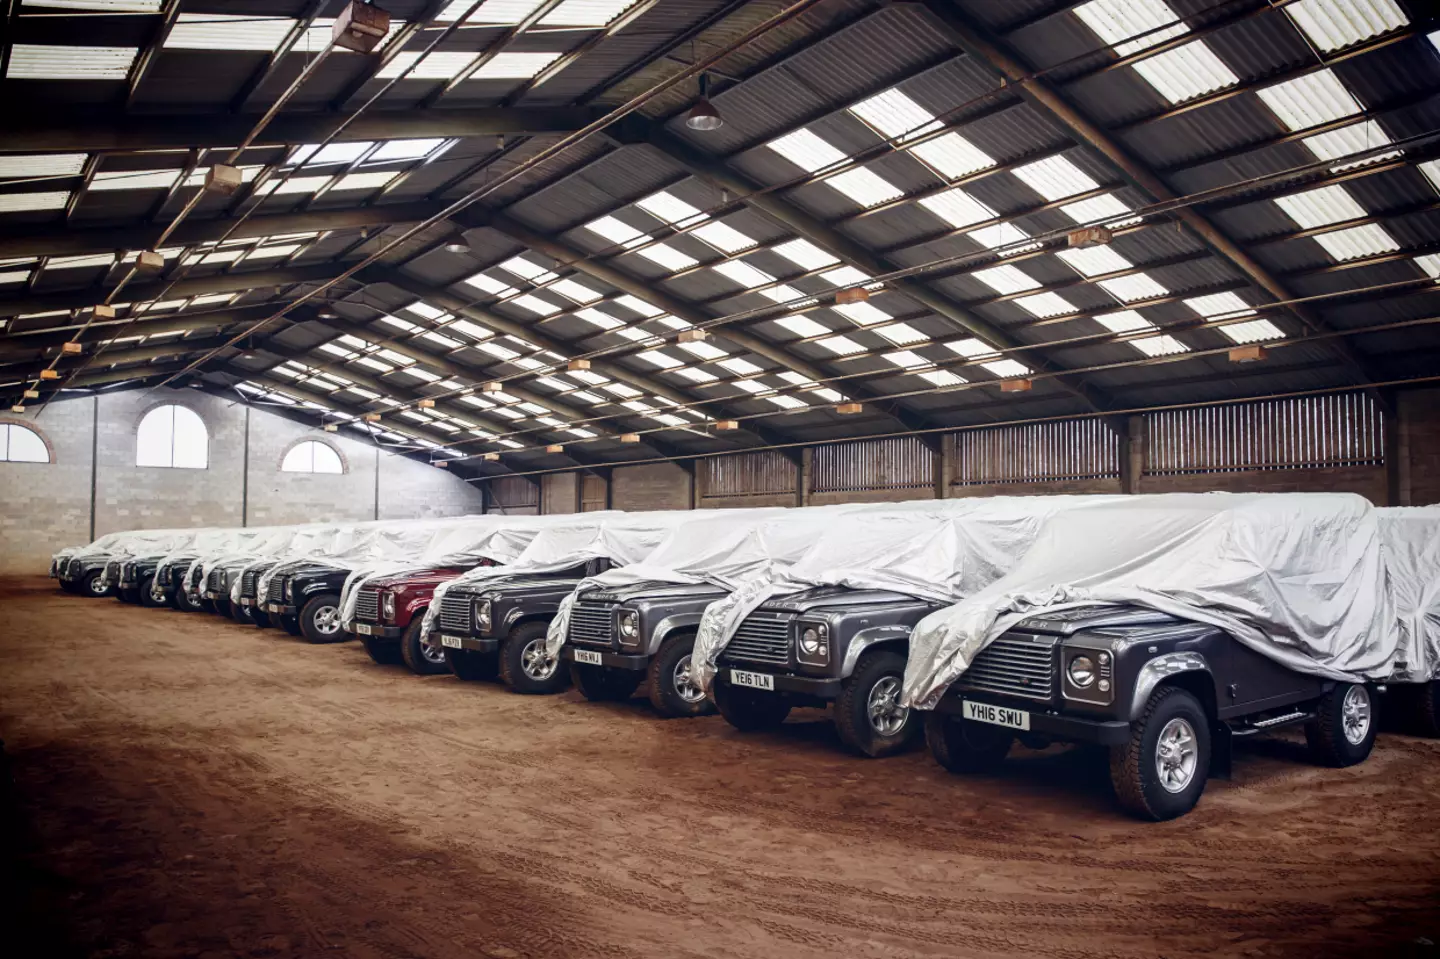 16 Land Rover Defenders are ready to be customised.